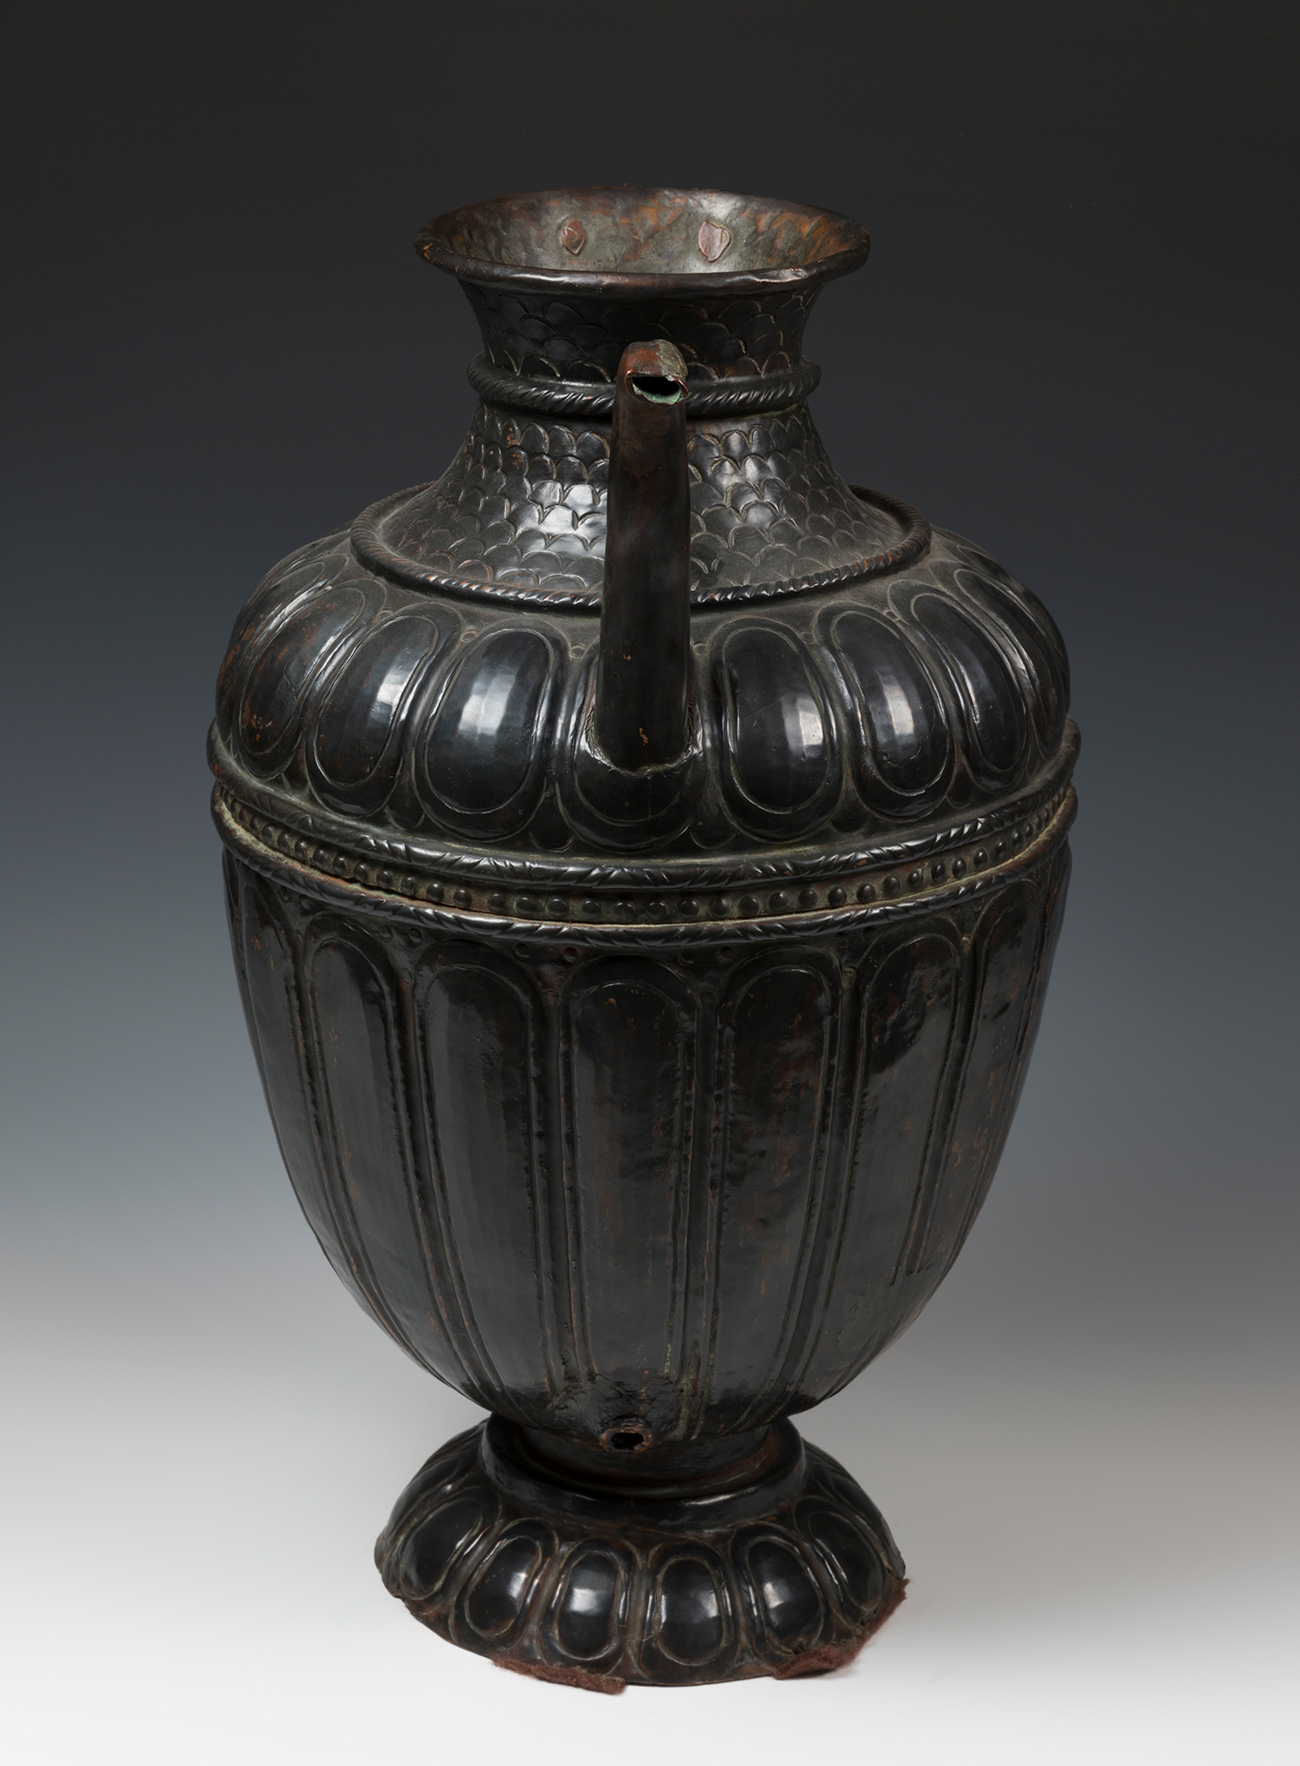 Jug; Italy, 16th-17th century.Patinated copper.With faults.Measurements: 39 x 29 x 23 cm.Jug made of - Image 6 of 7